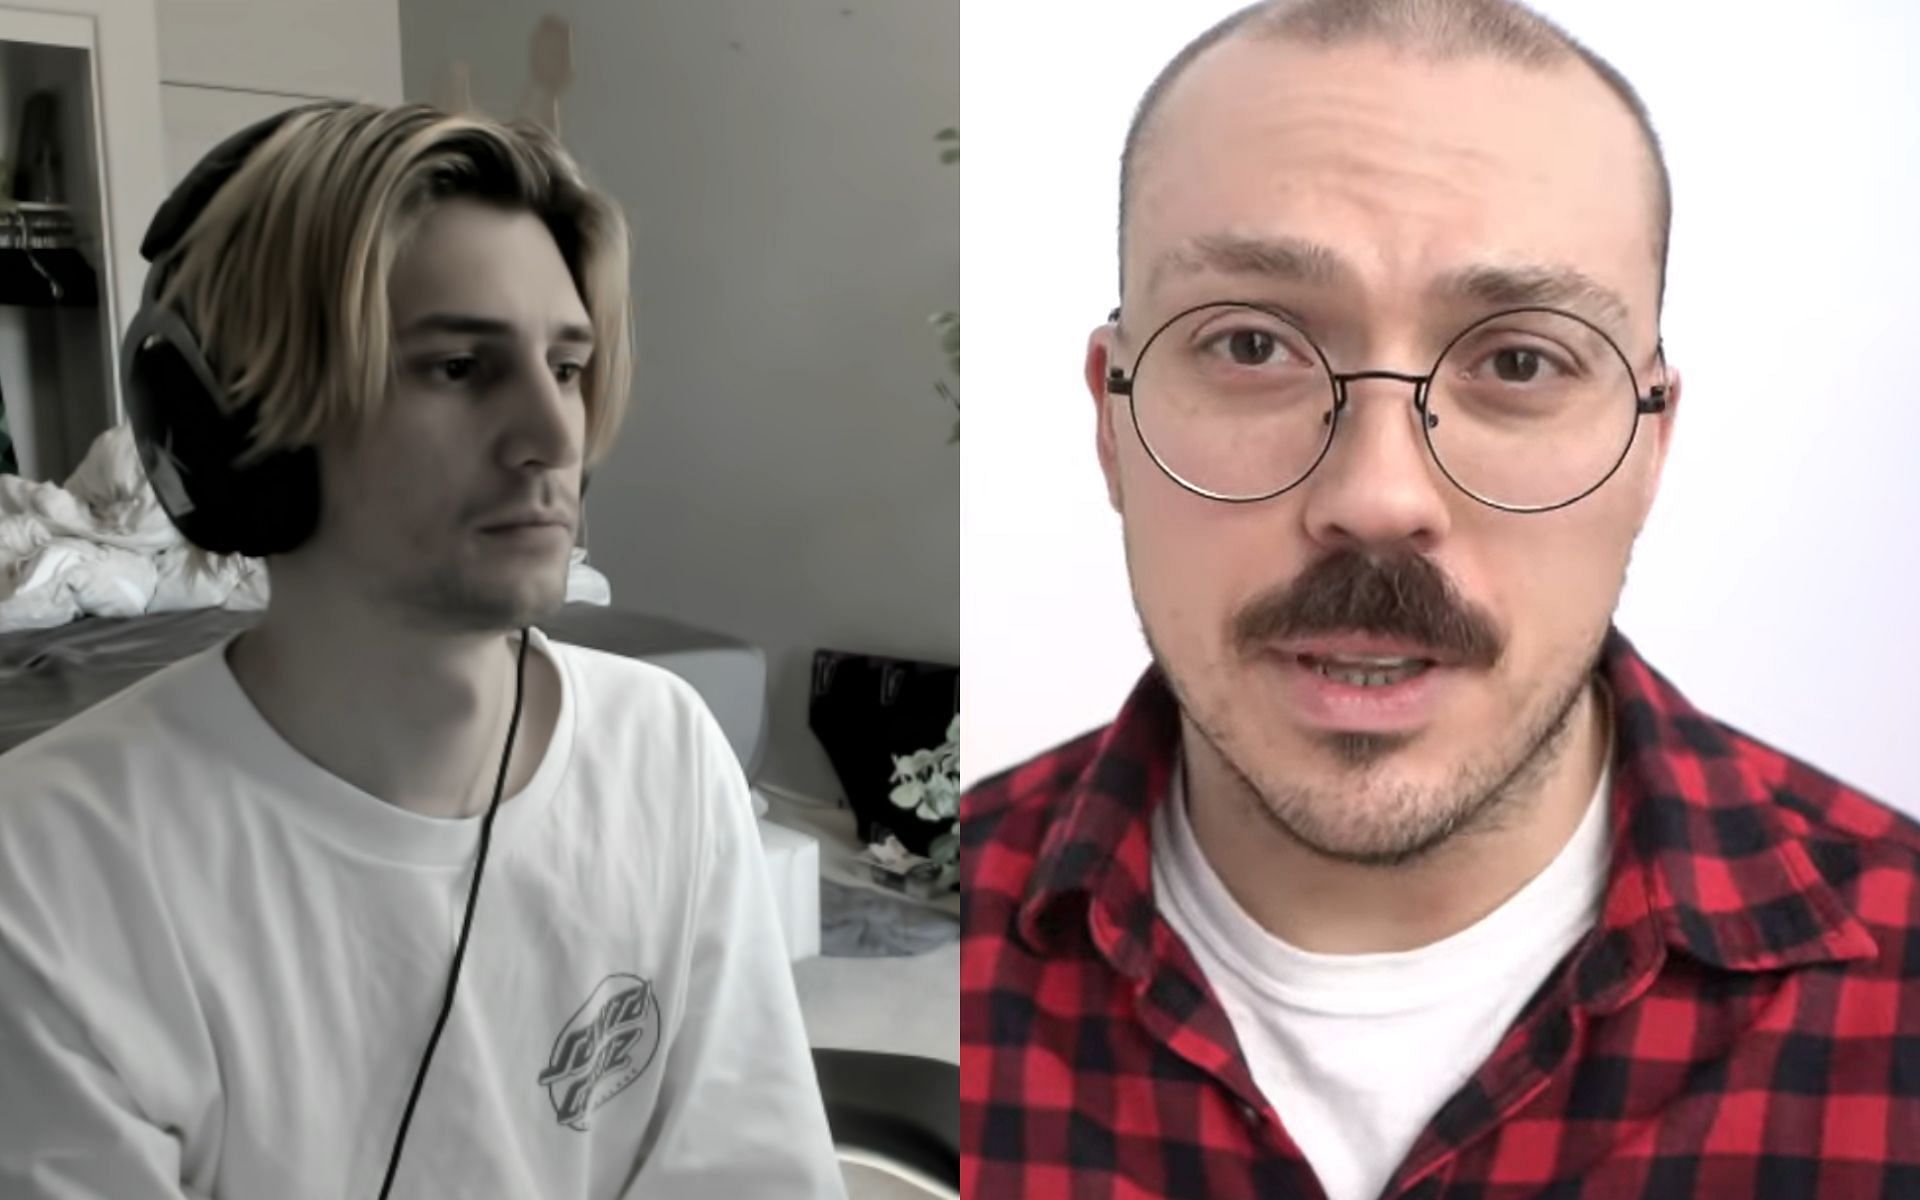 xQc blasts Anthony Fantano for his take on Kanye West